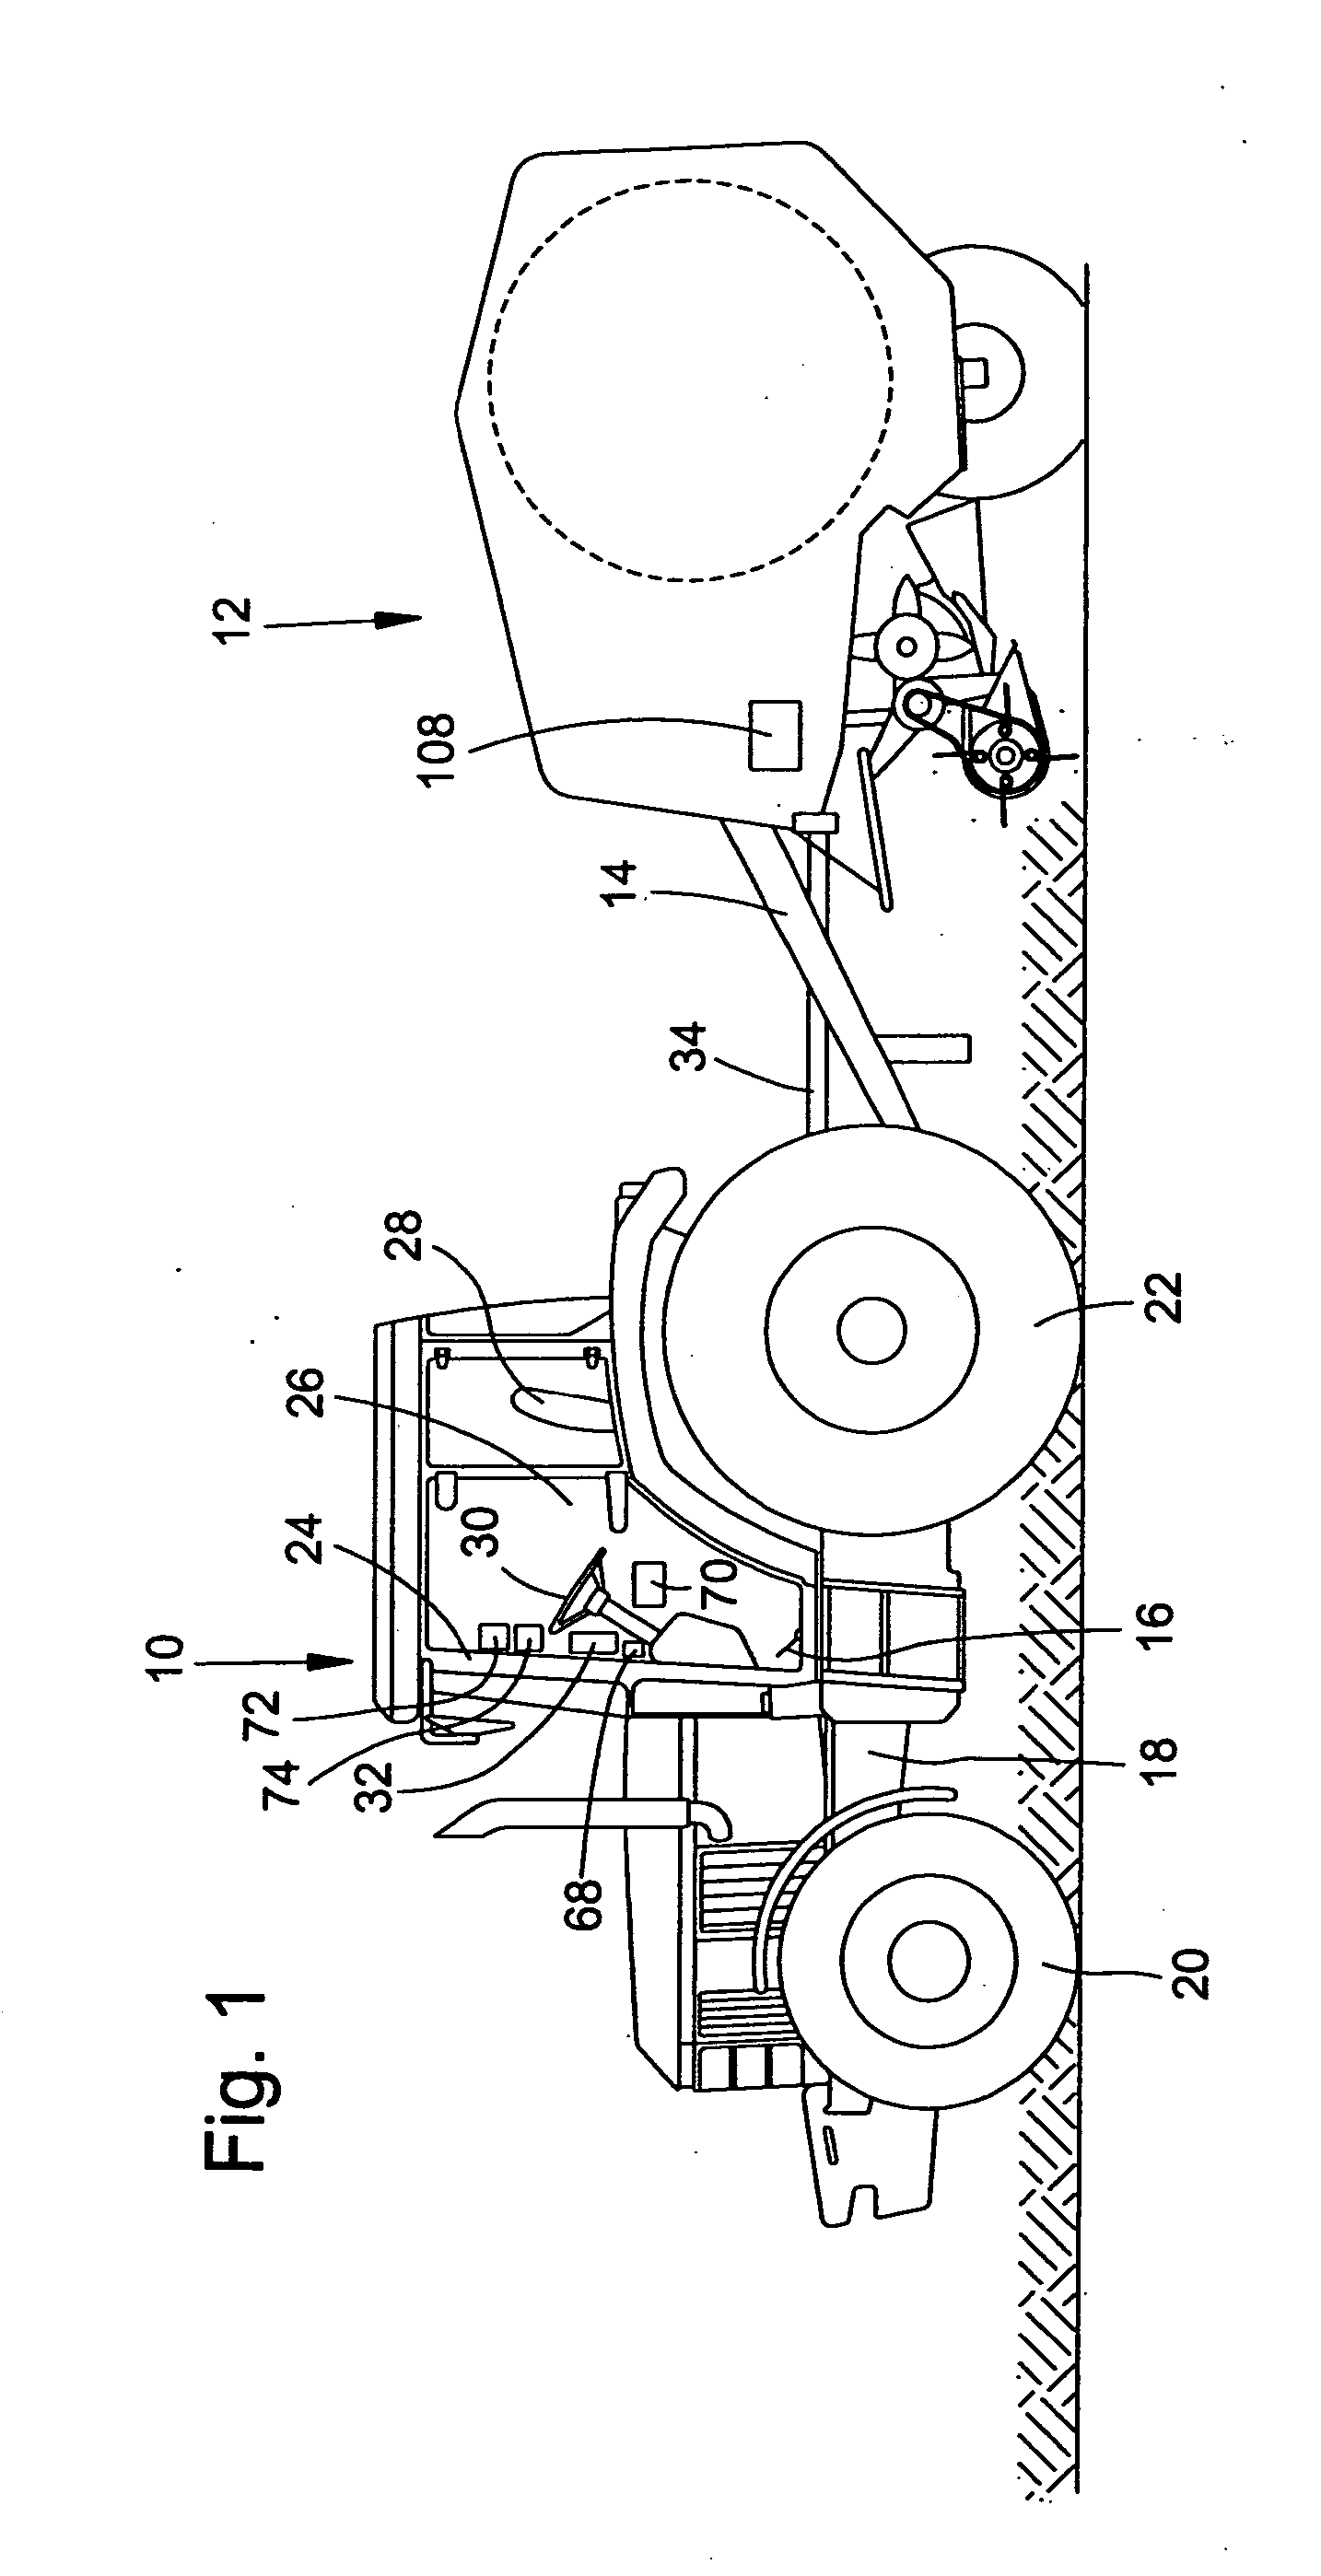 Agricultural machine with PTO torque limiting feature